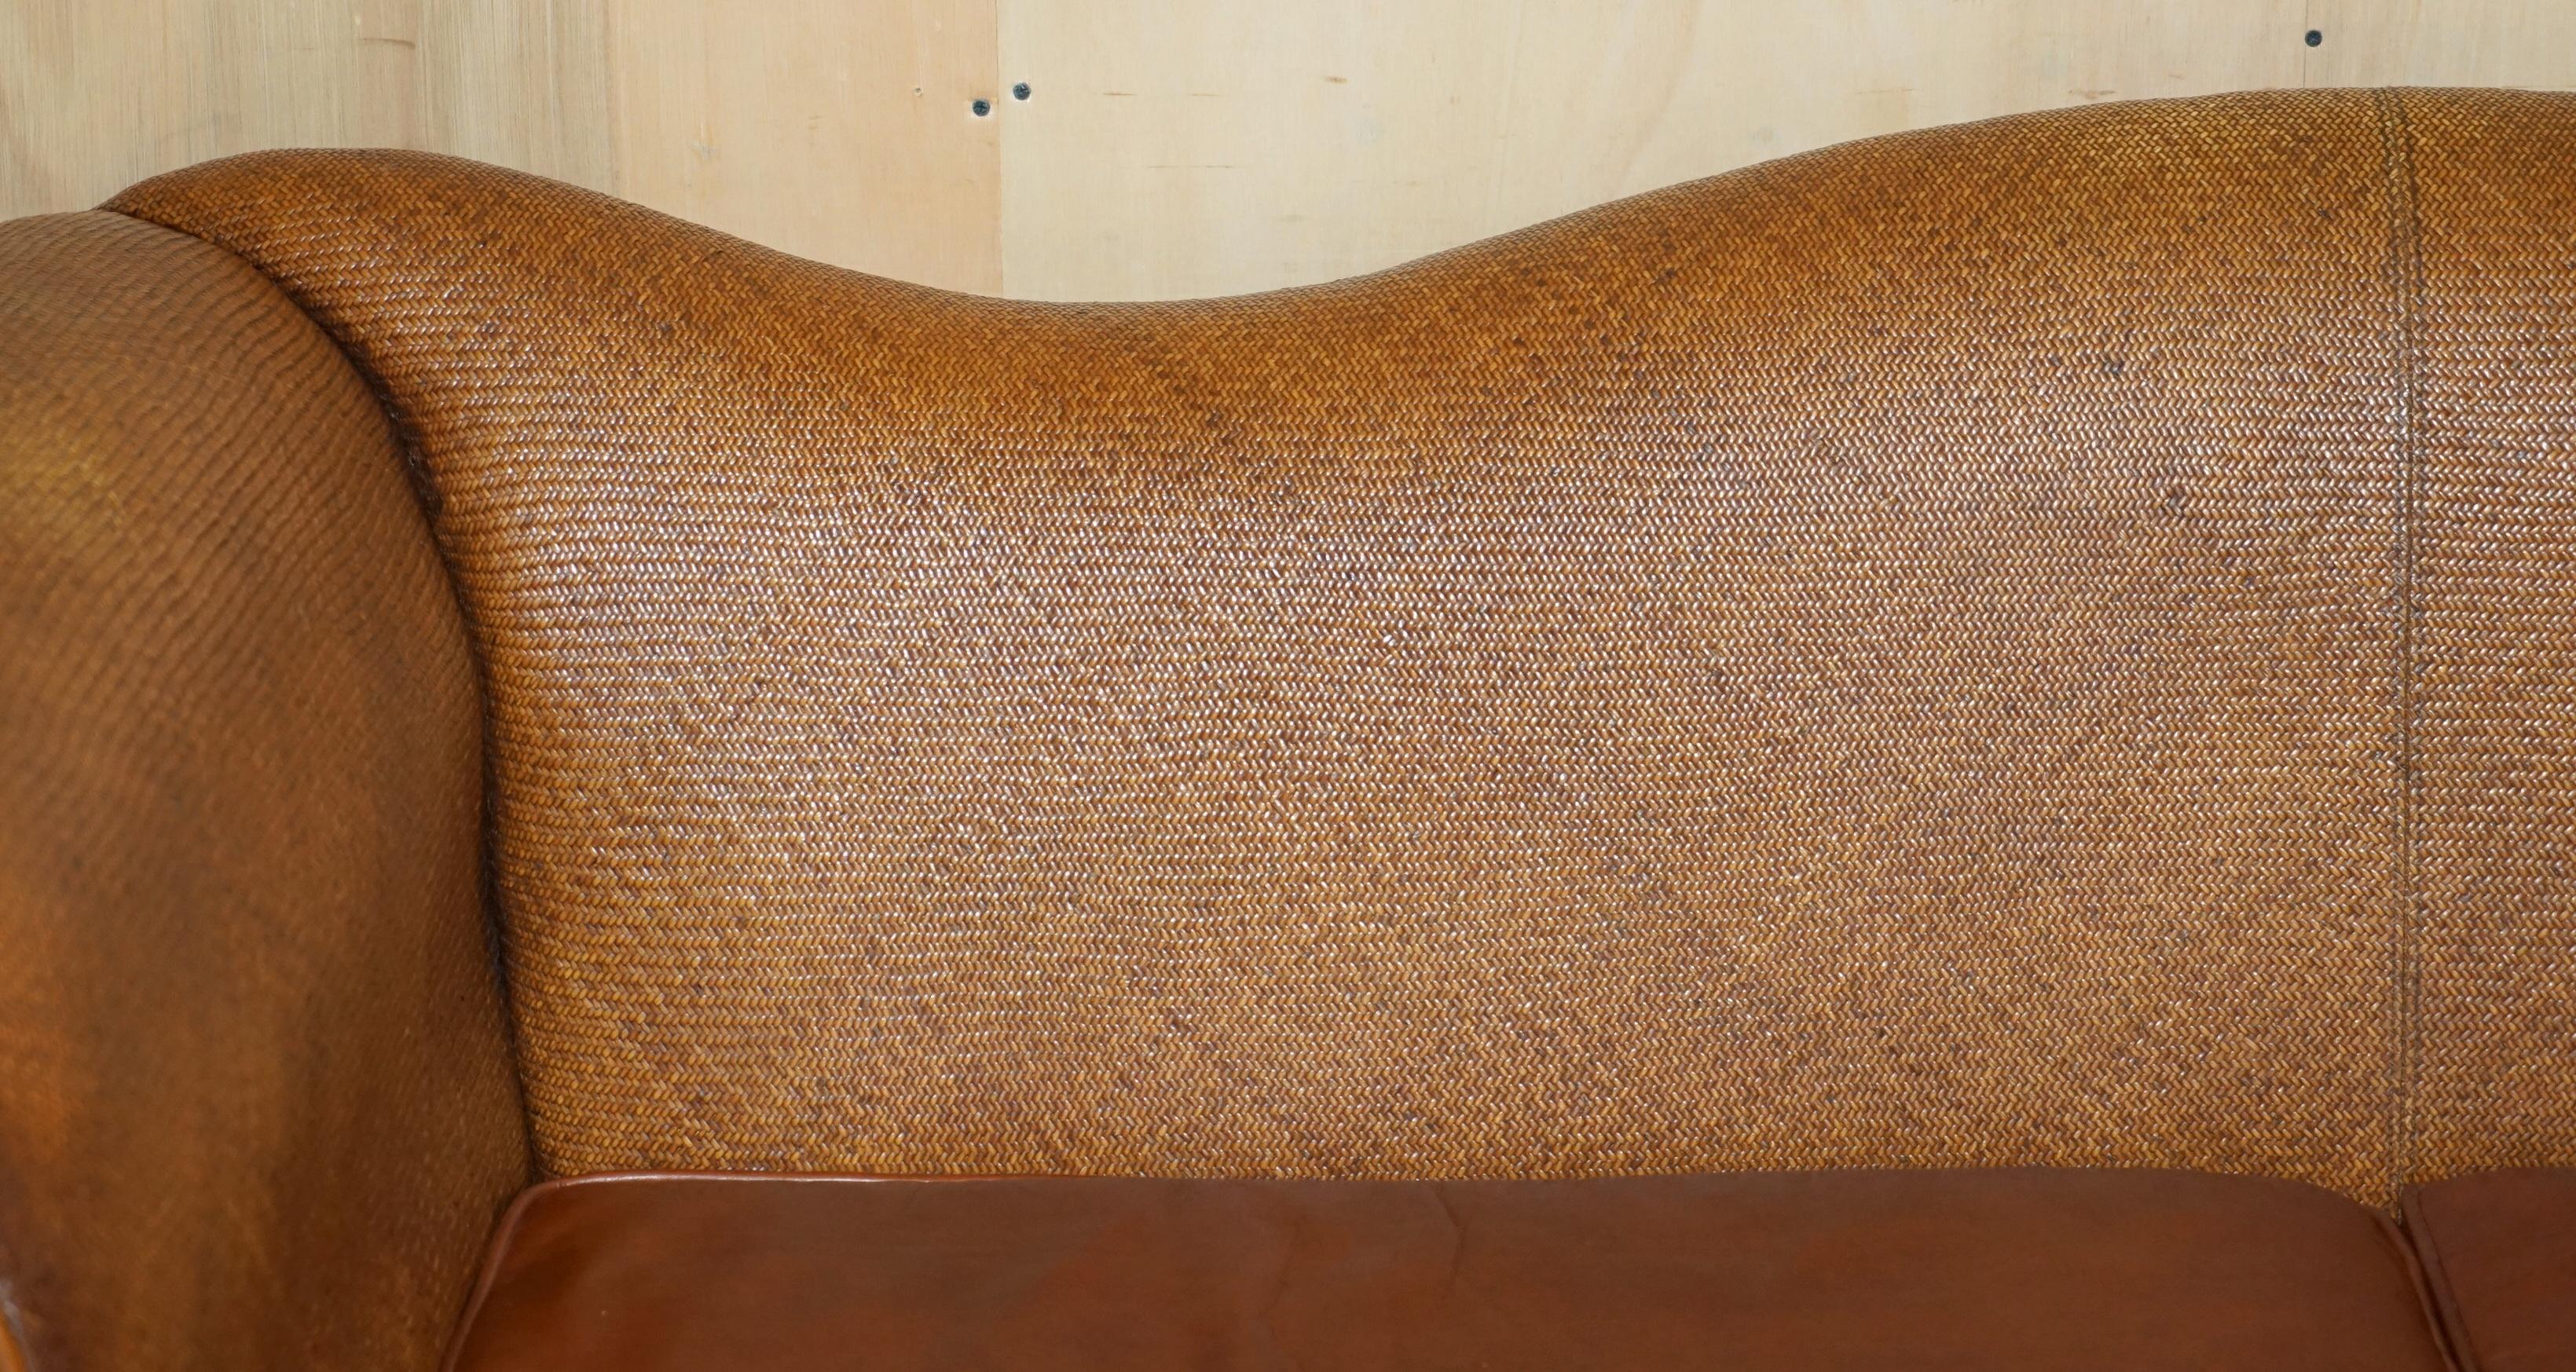 RARE PAIR OF THOMASVILLE SAFARI BROWN LEATHER WOVEN SOFAS PART OF LARGE SUITe For Sale 5